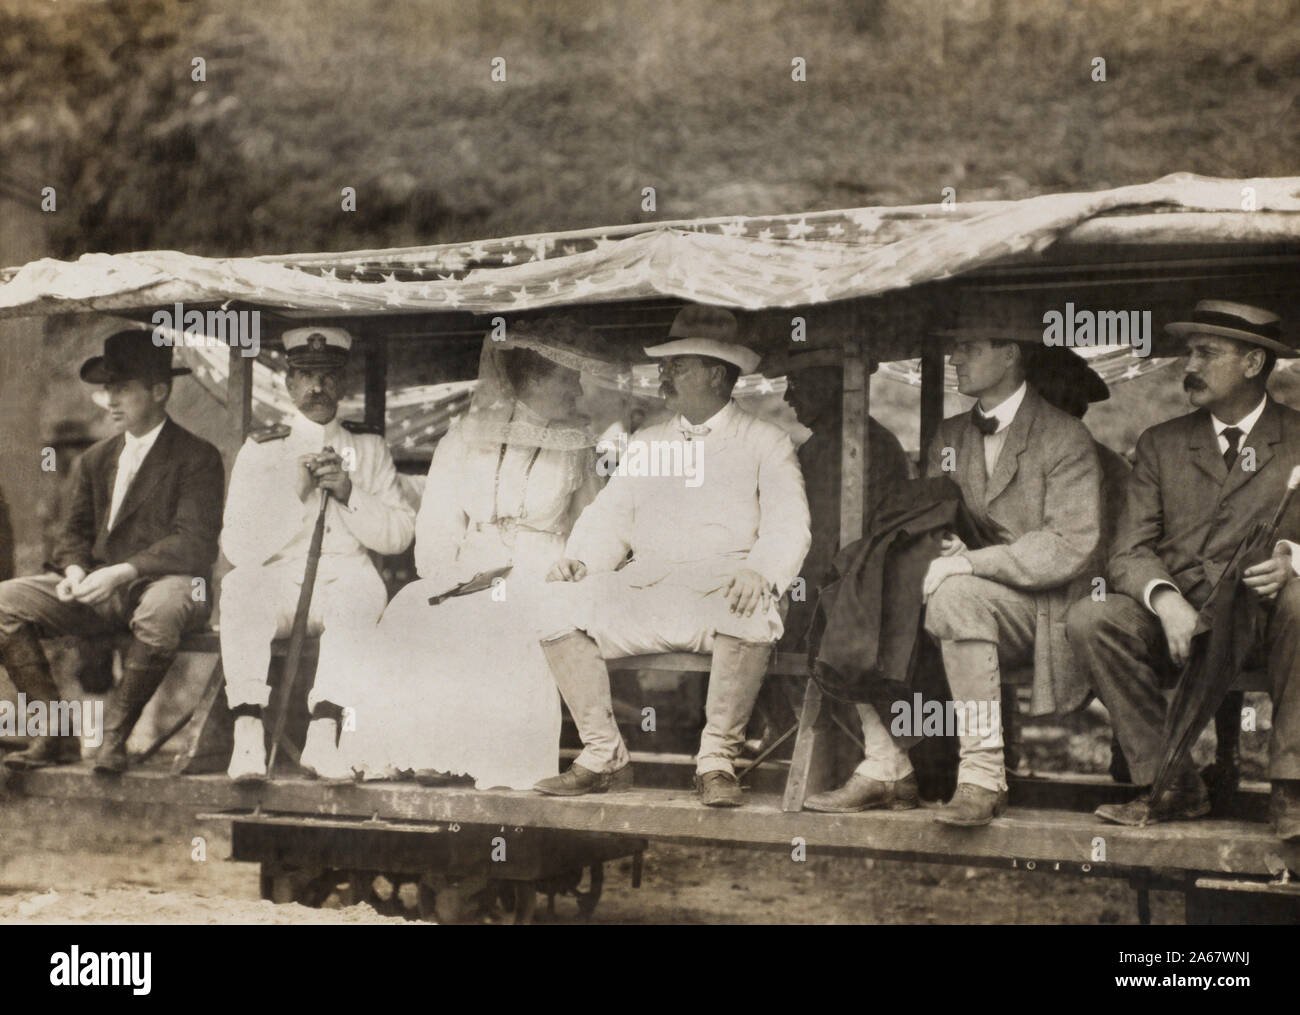 U.S. President Theodore Roosevelt and Wife Edith Roosevelt inspecting Canal Work from Narrow Gauge Train, L-R: Engineer J. G. Holcombe, Surgeon General Rear Admiral Presley Marion Rixey, Edith Roosevelt, President Roosevelt, unidentified man, John F. Stevens, Balboa Heights, Panama, Underwood & Underwood, November 1906 Stock Photo